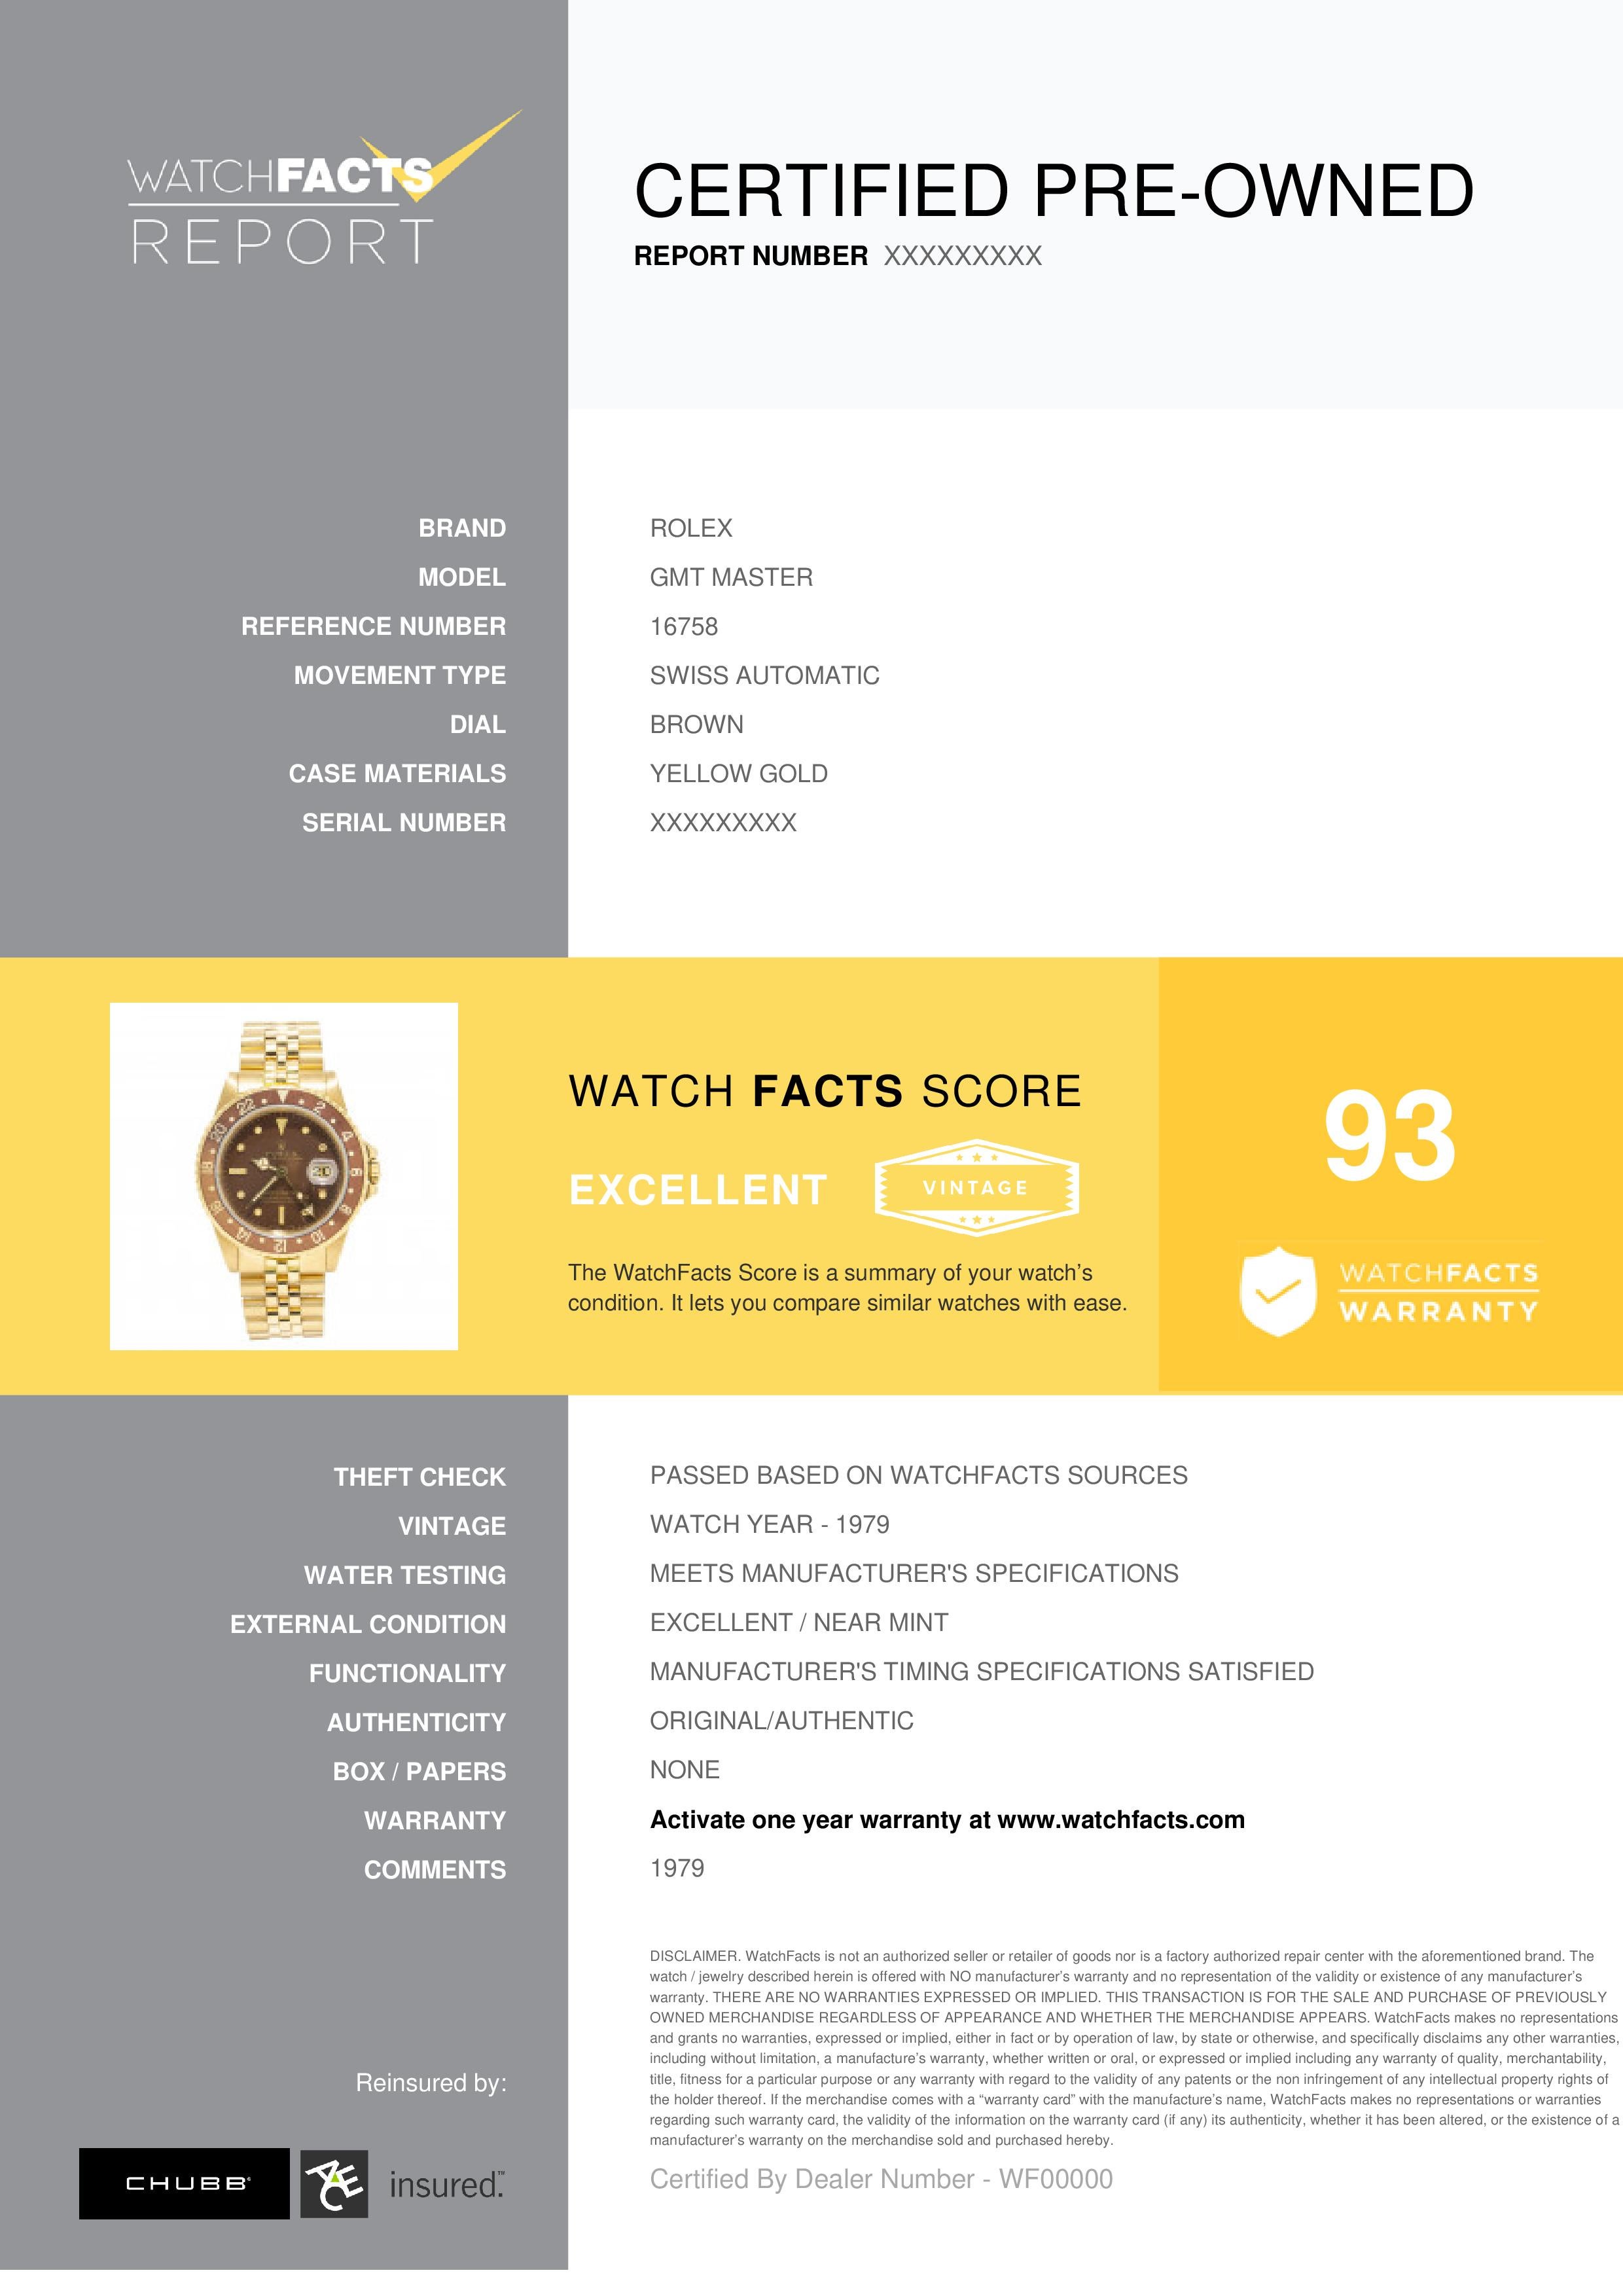 Rolex GMT Master Reference #: 16758. Mens Swiss Automatic Watch Yellow Gold Brown 40 MM. Verified and Certified by WatchFacts. 1 year warranty offered by WatchFacts.
